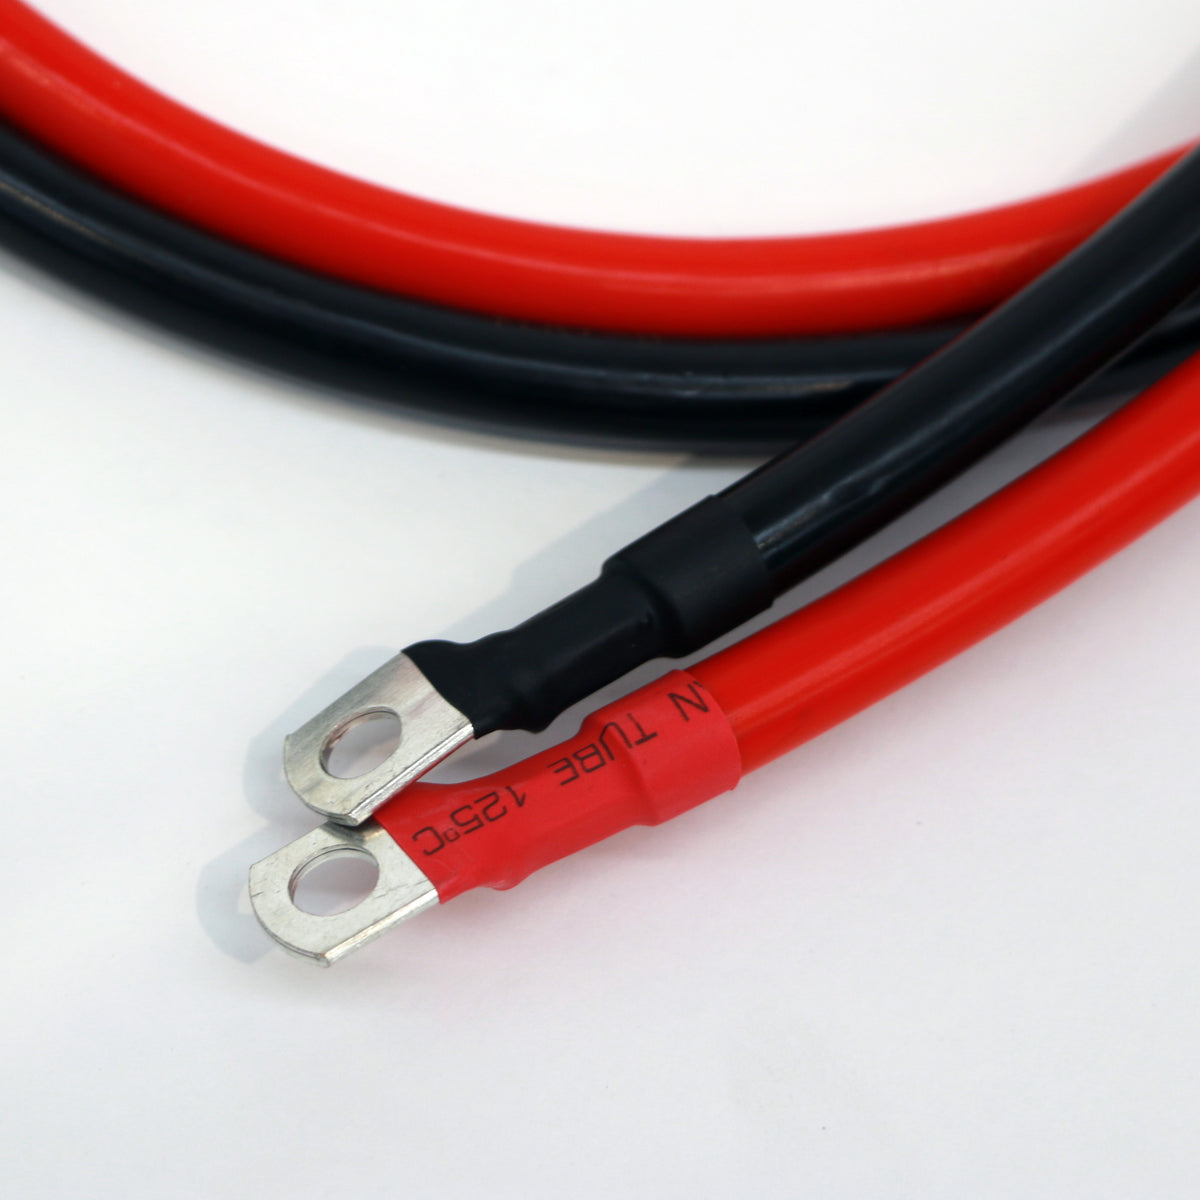 35mm² Pre-Crimped Cable Red&Black 1 meter - M8 + M6